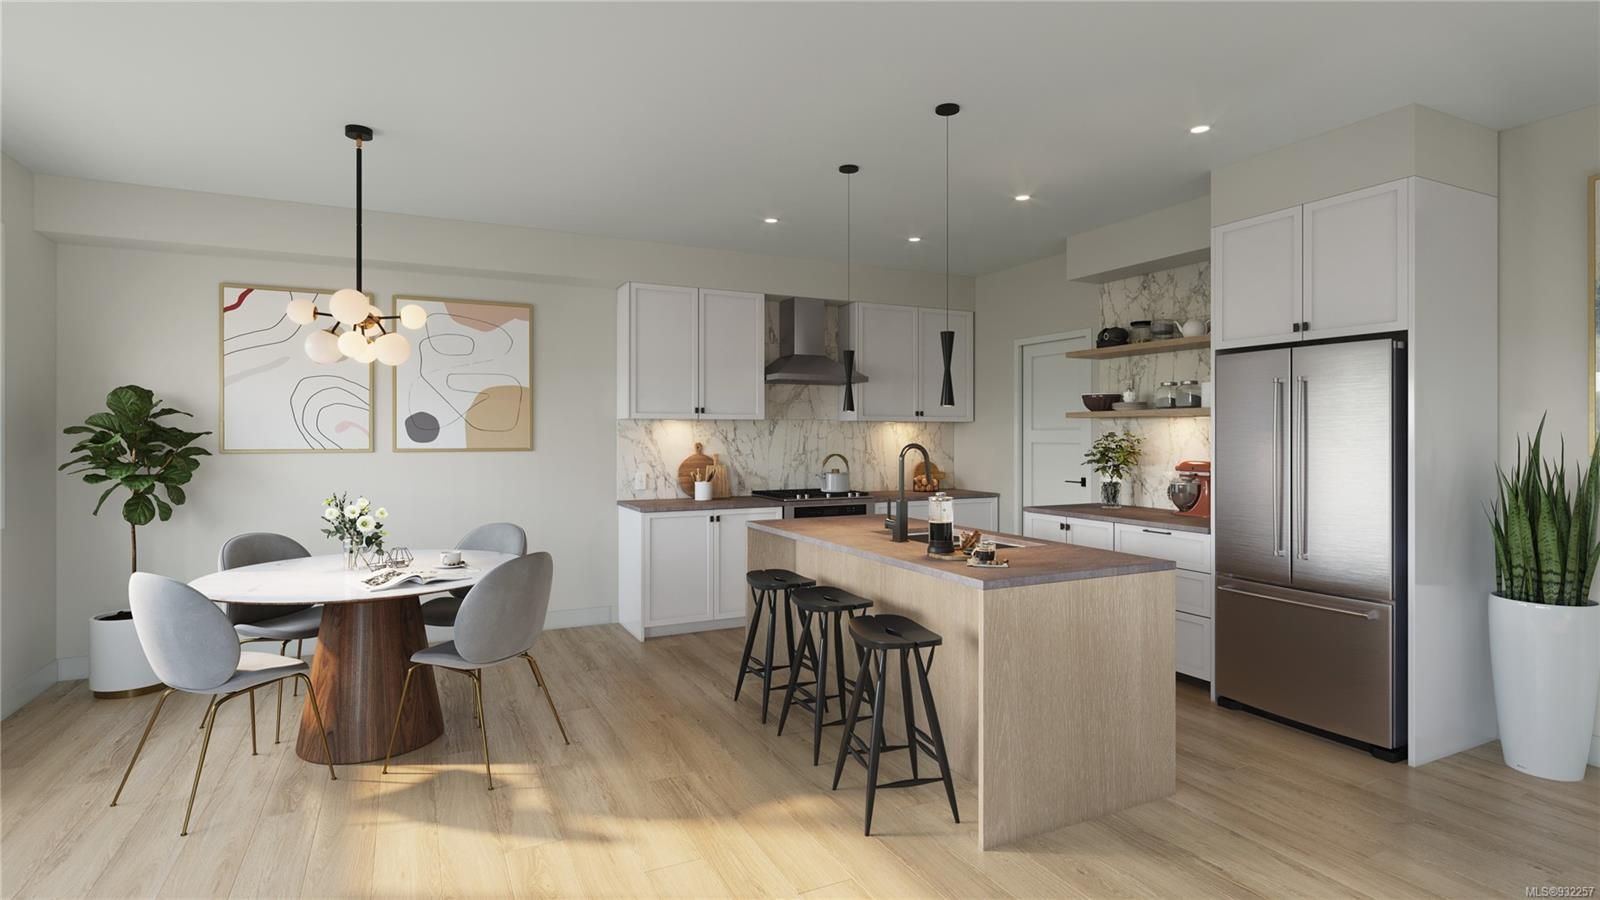 Rendering of Inland Scheme Kitchen, actual construction may vary.